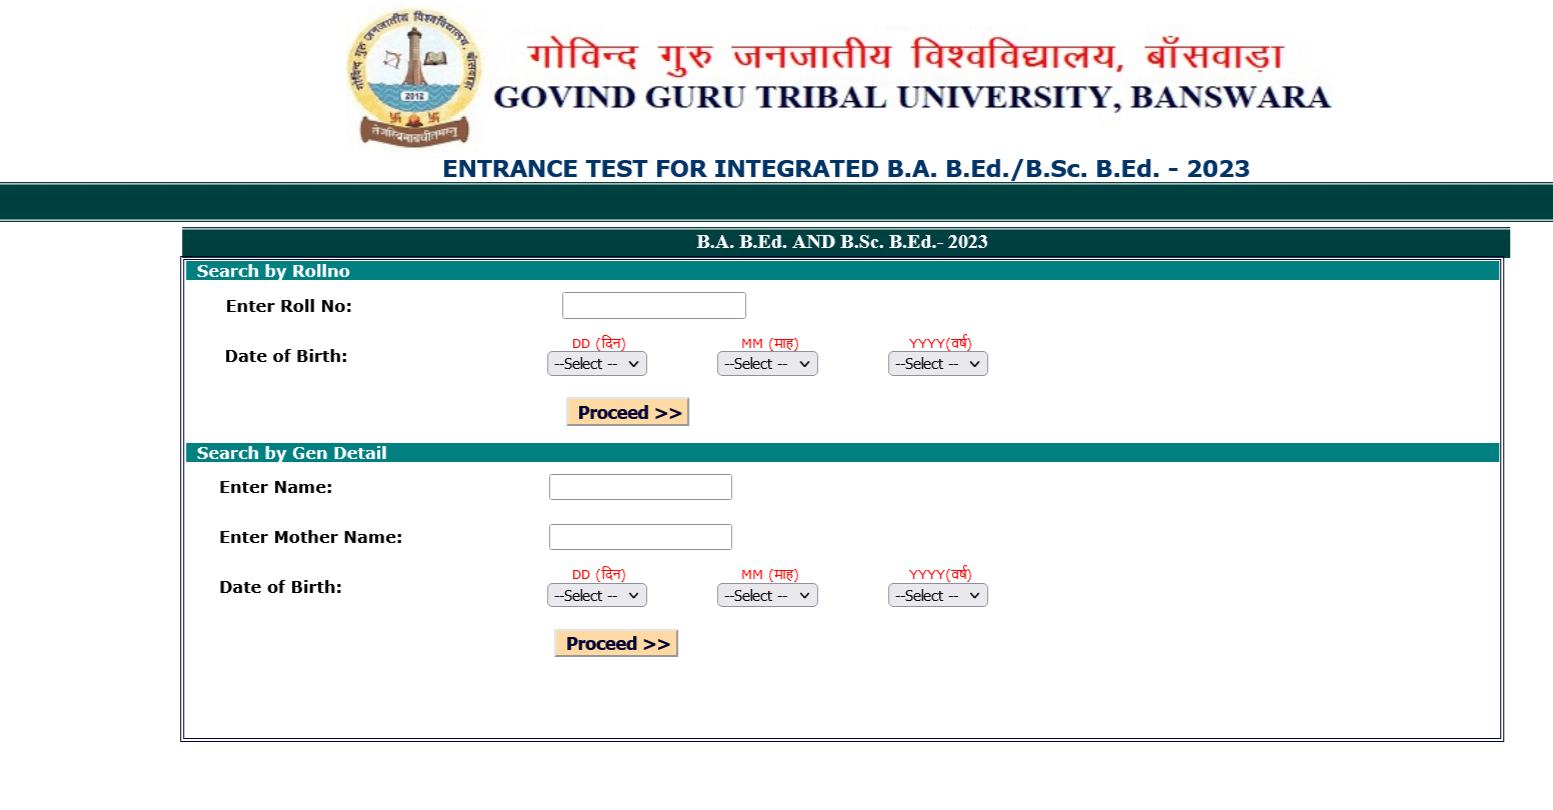 How to Check PTET Result